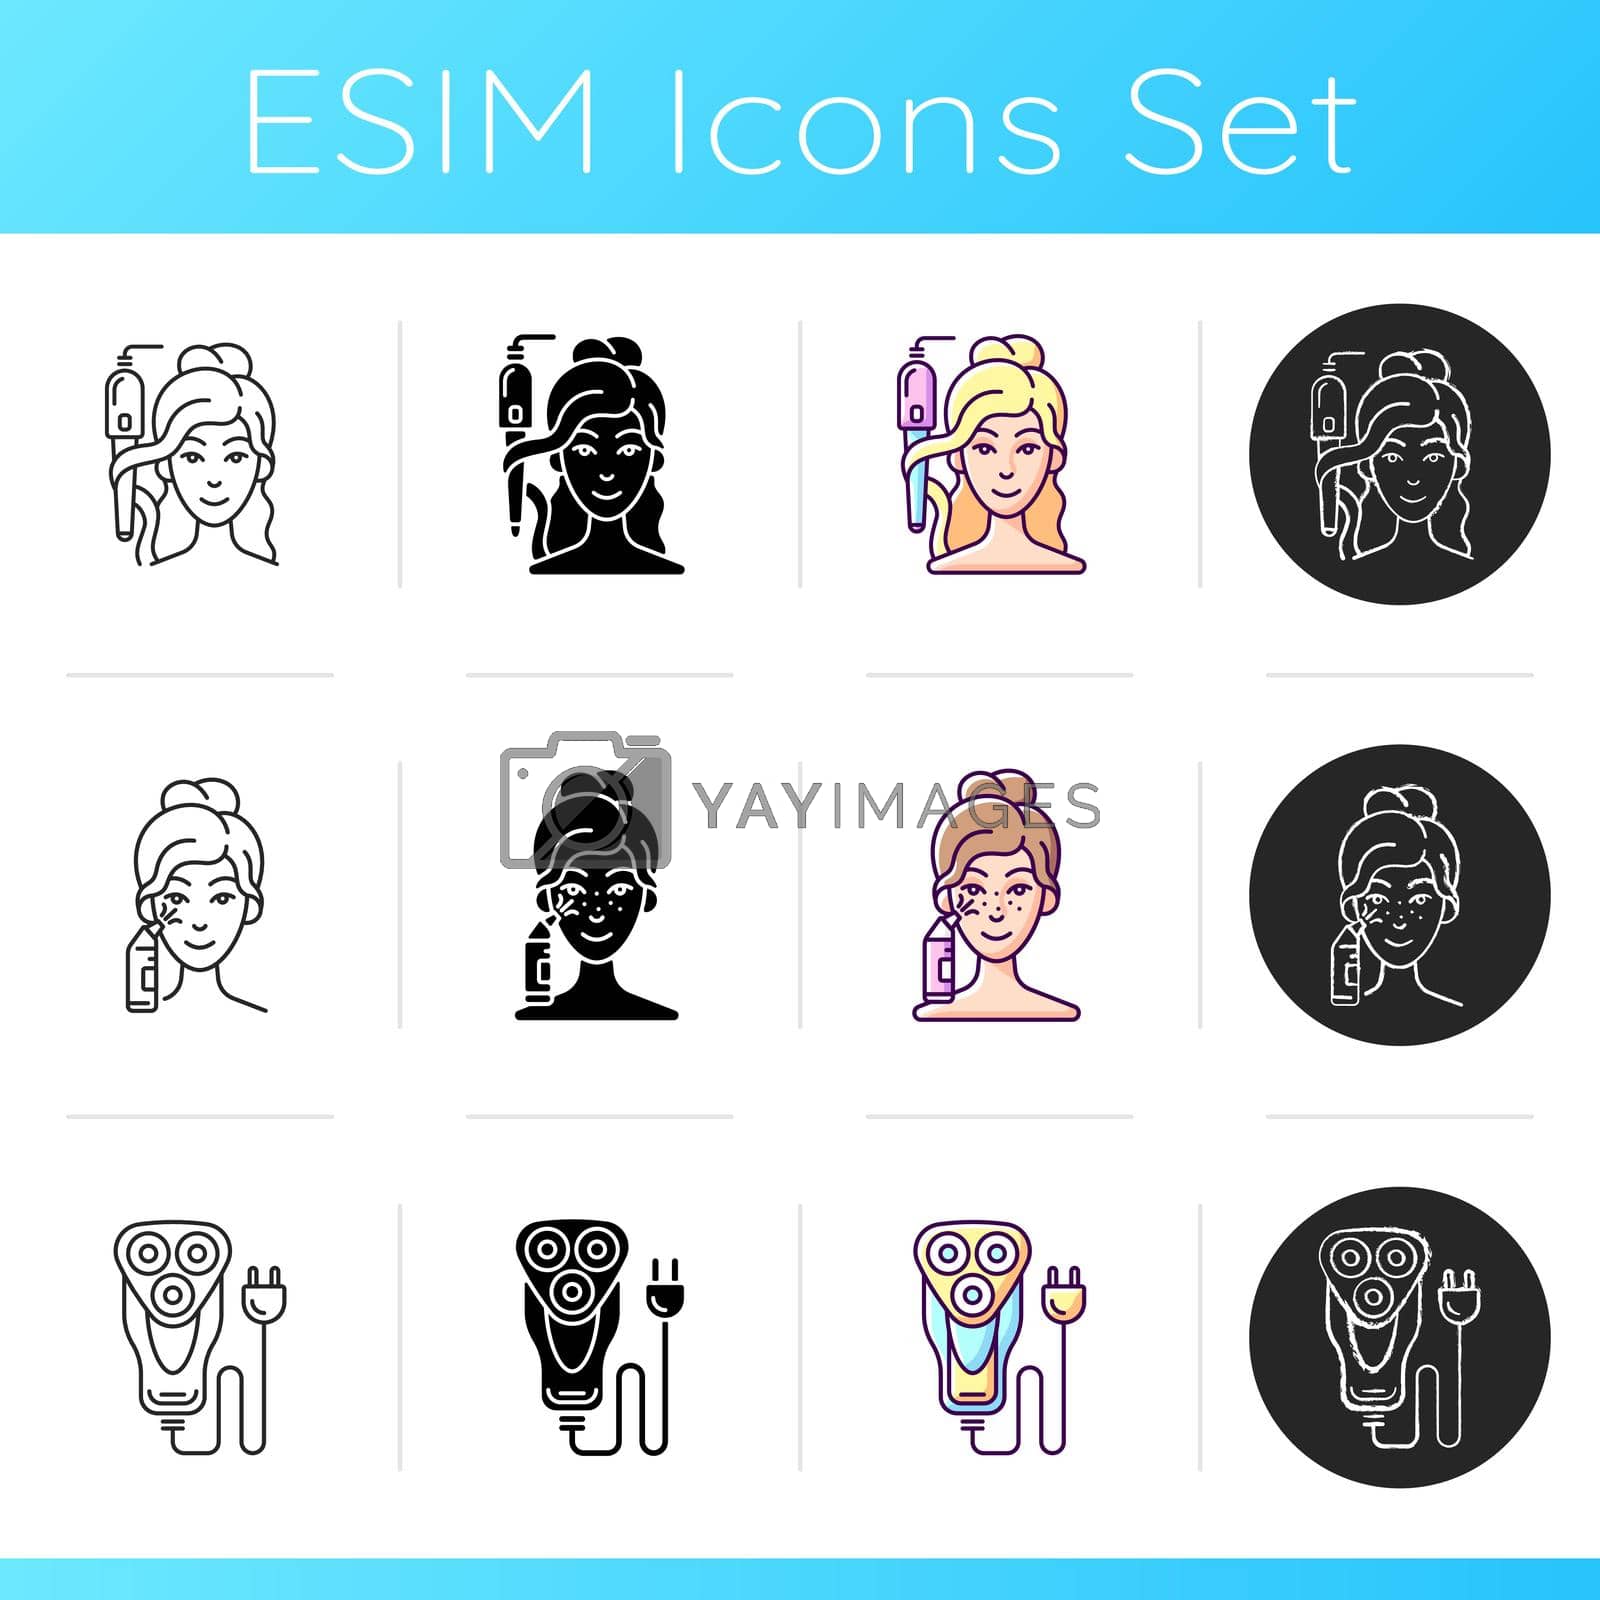 Beauty gadgets icons set. Curling iron. Blackhead remover. Electric shaver. Pore retexturizing. Trimmer. Hair tong. Dry razor. Linear, black and RGB color styles. Isolated vector illustrations